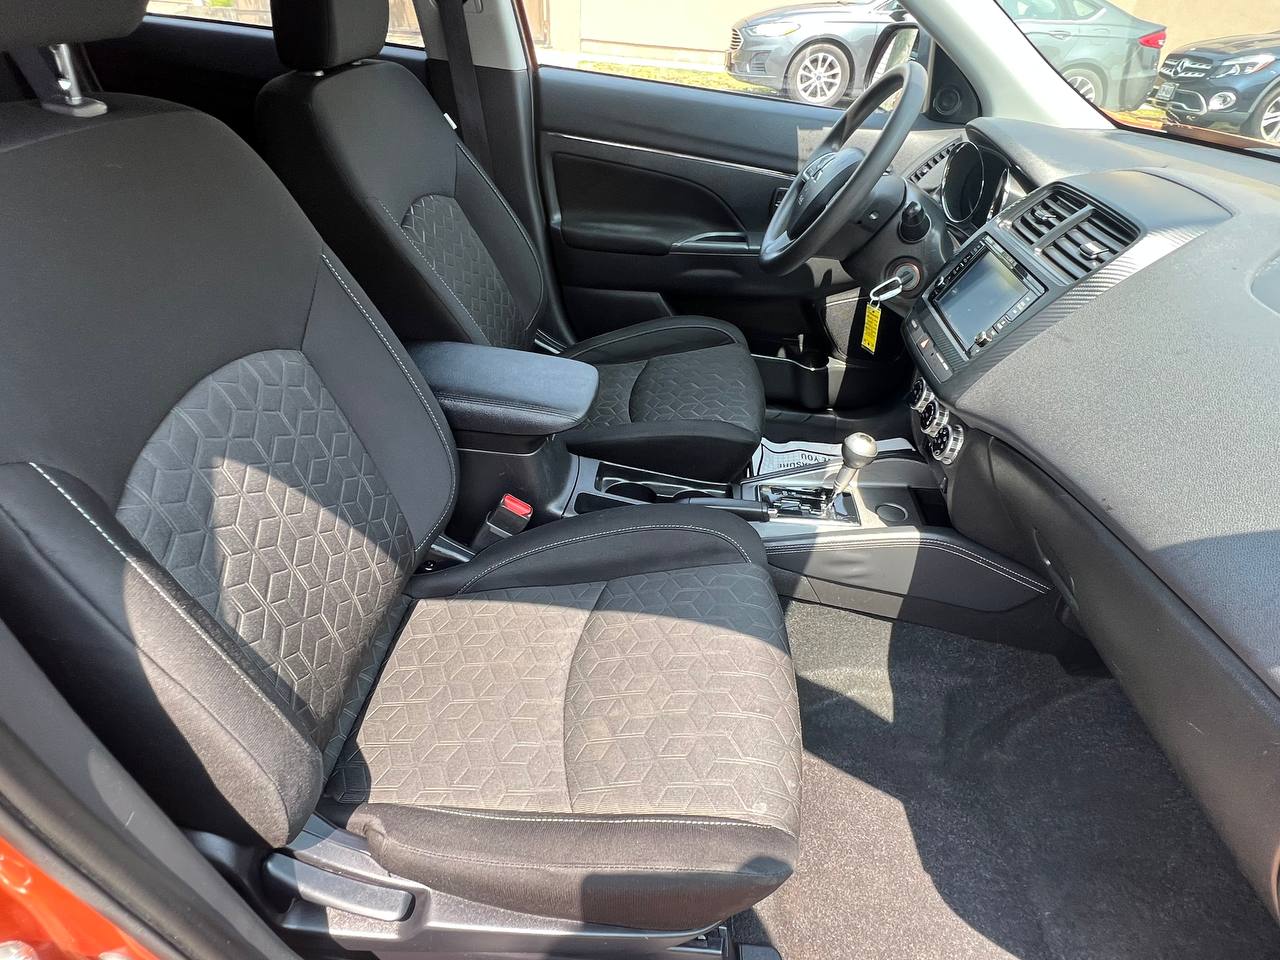 Used - Mitsubishi Outlander Sport Wagon for sale in Staten Island NY